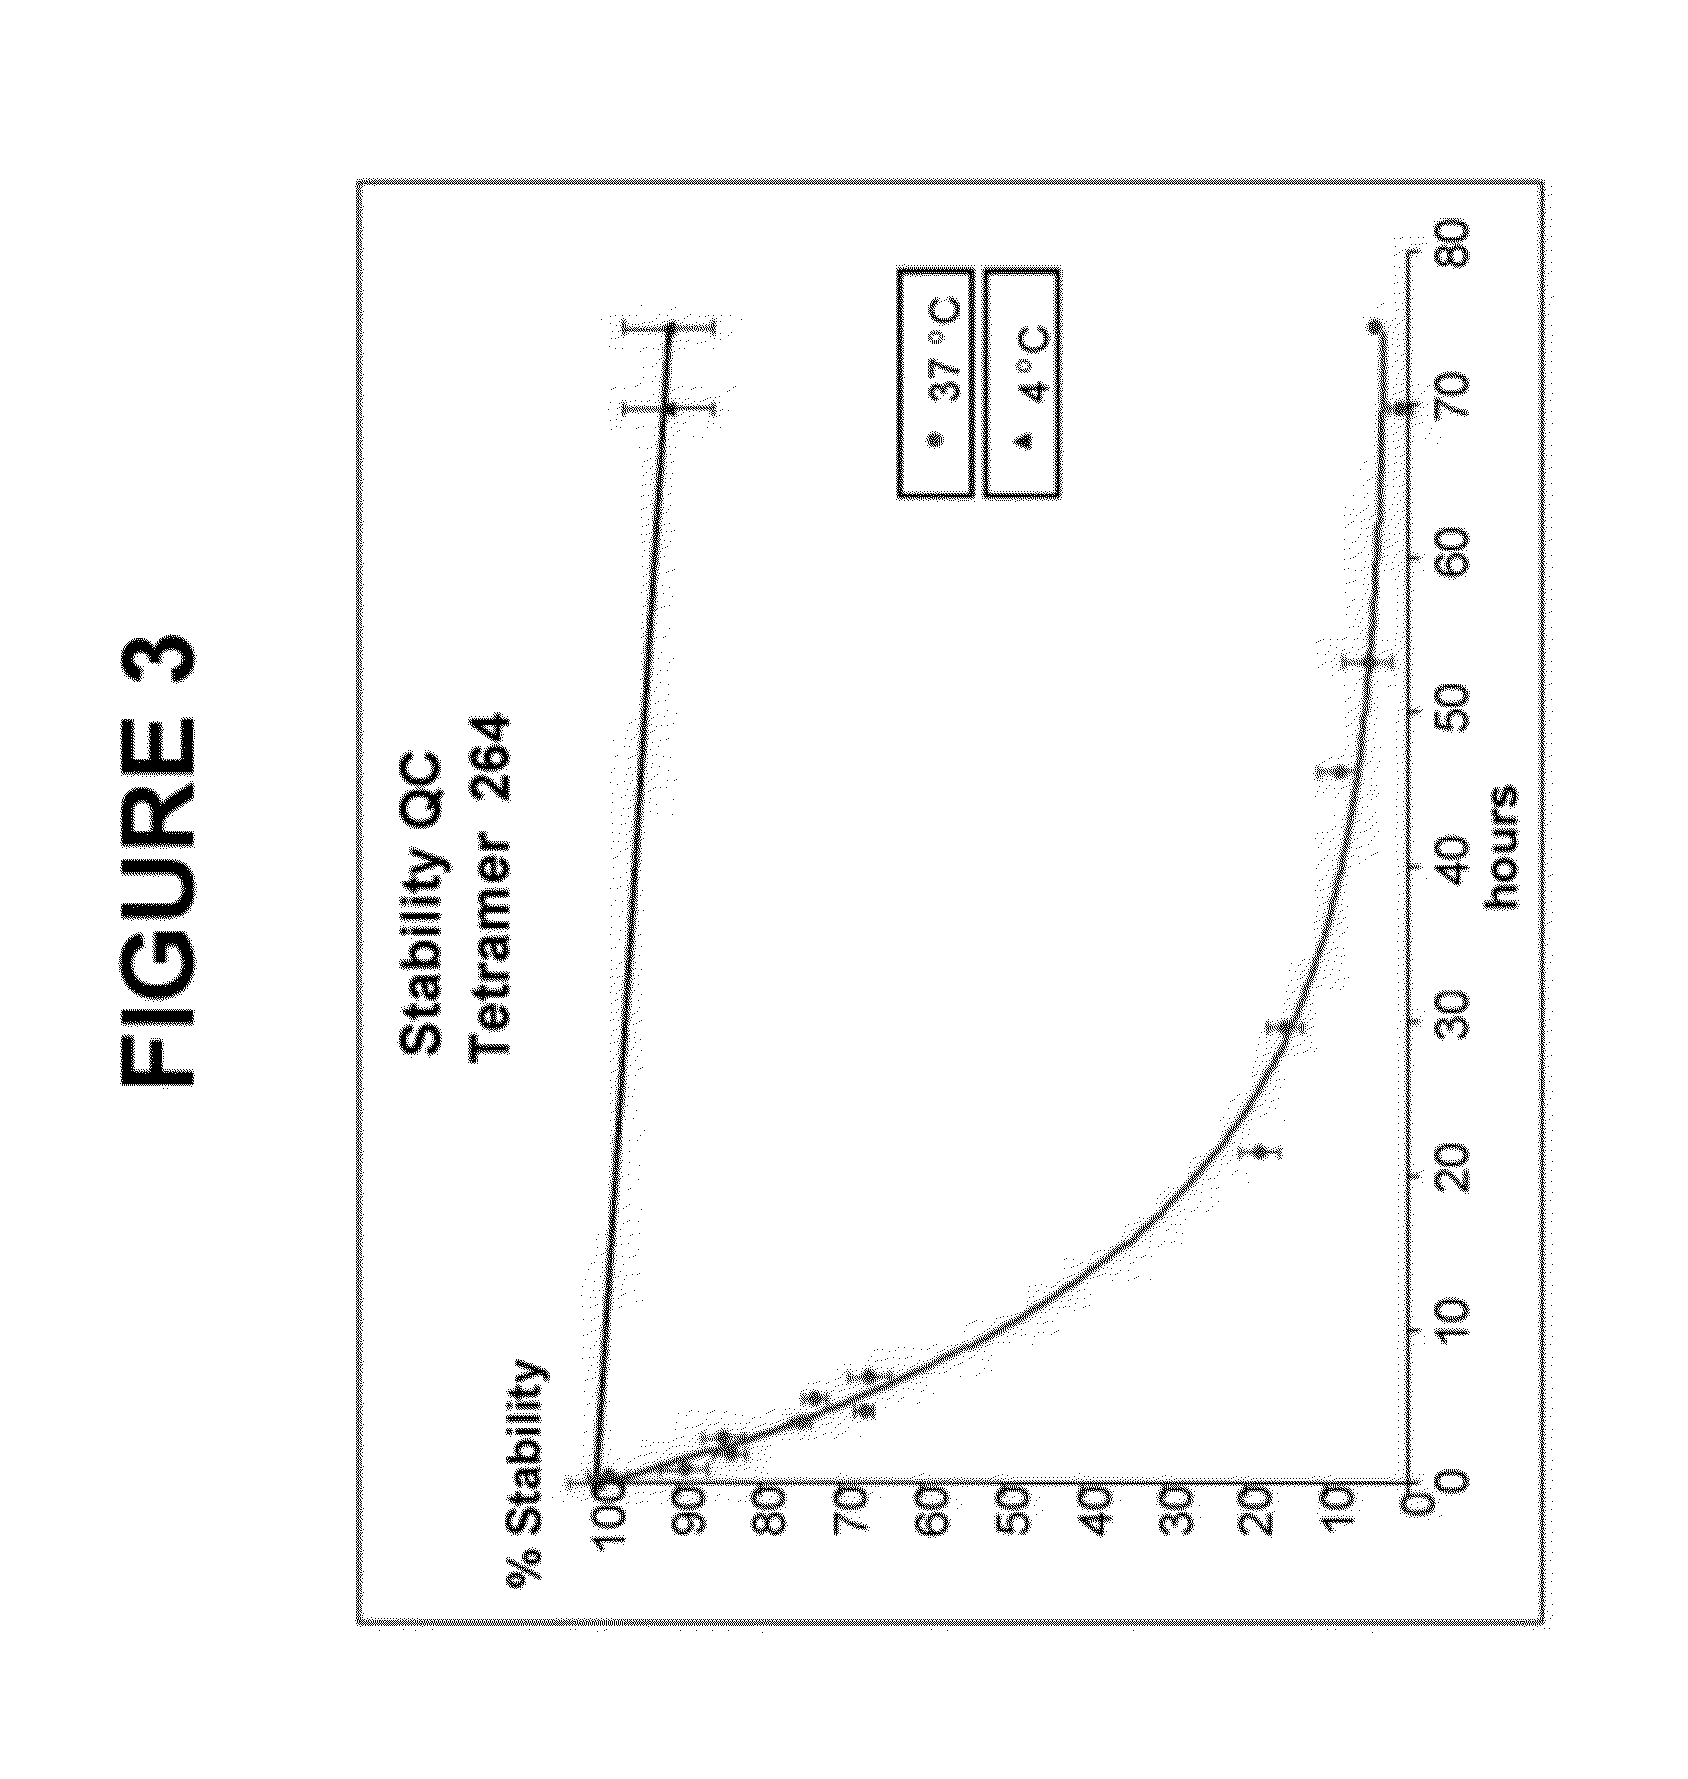 Antibodies as t cell receptor mimics, methods of production and uses thereof